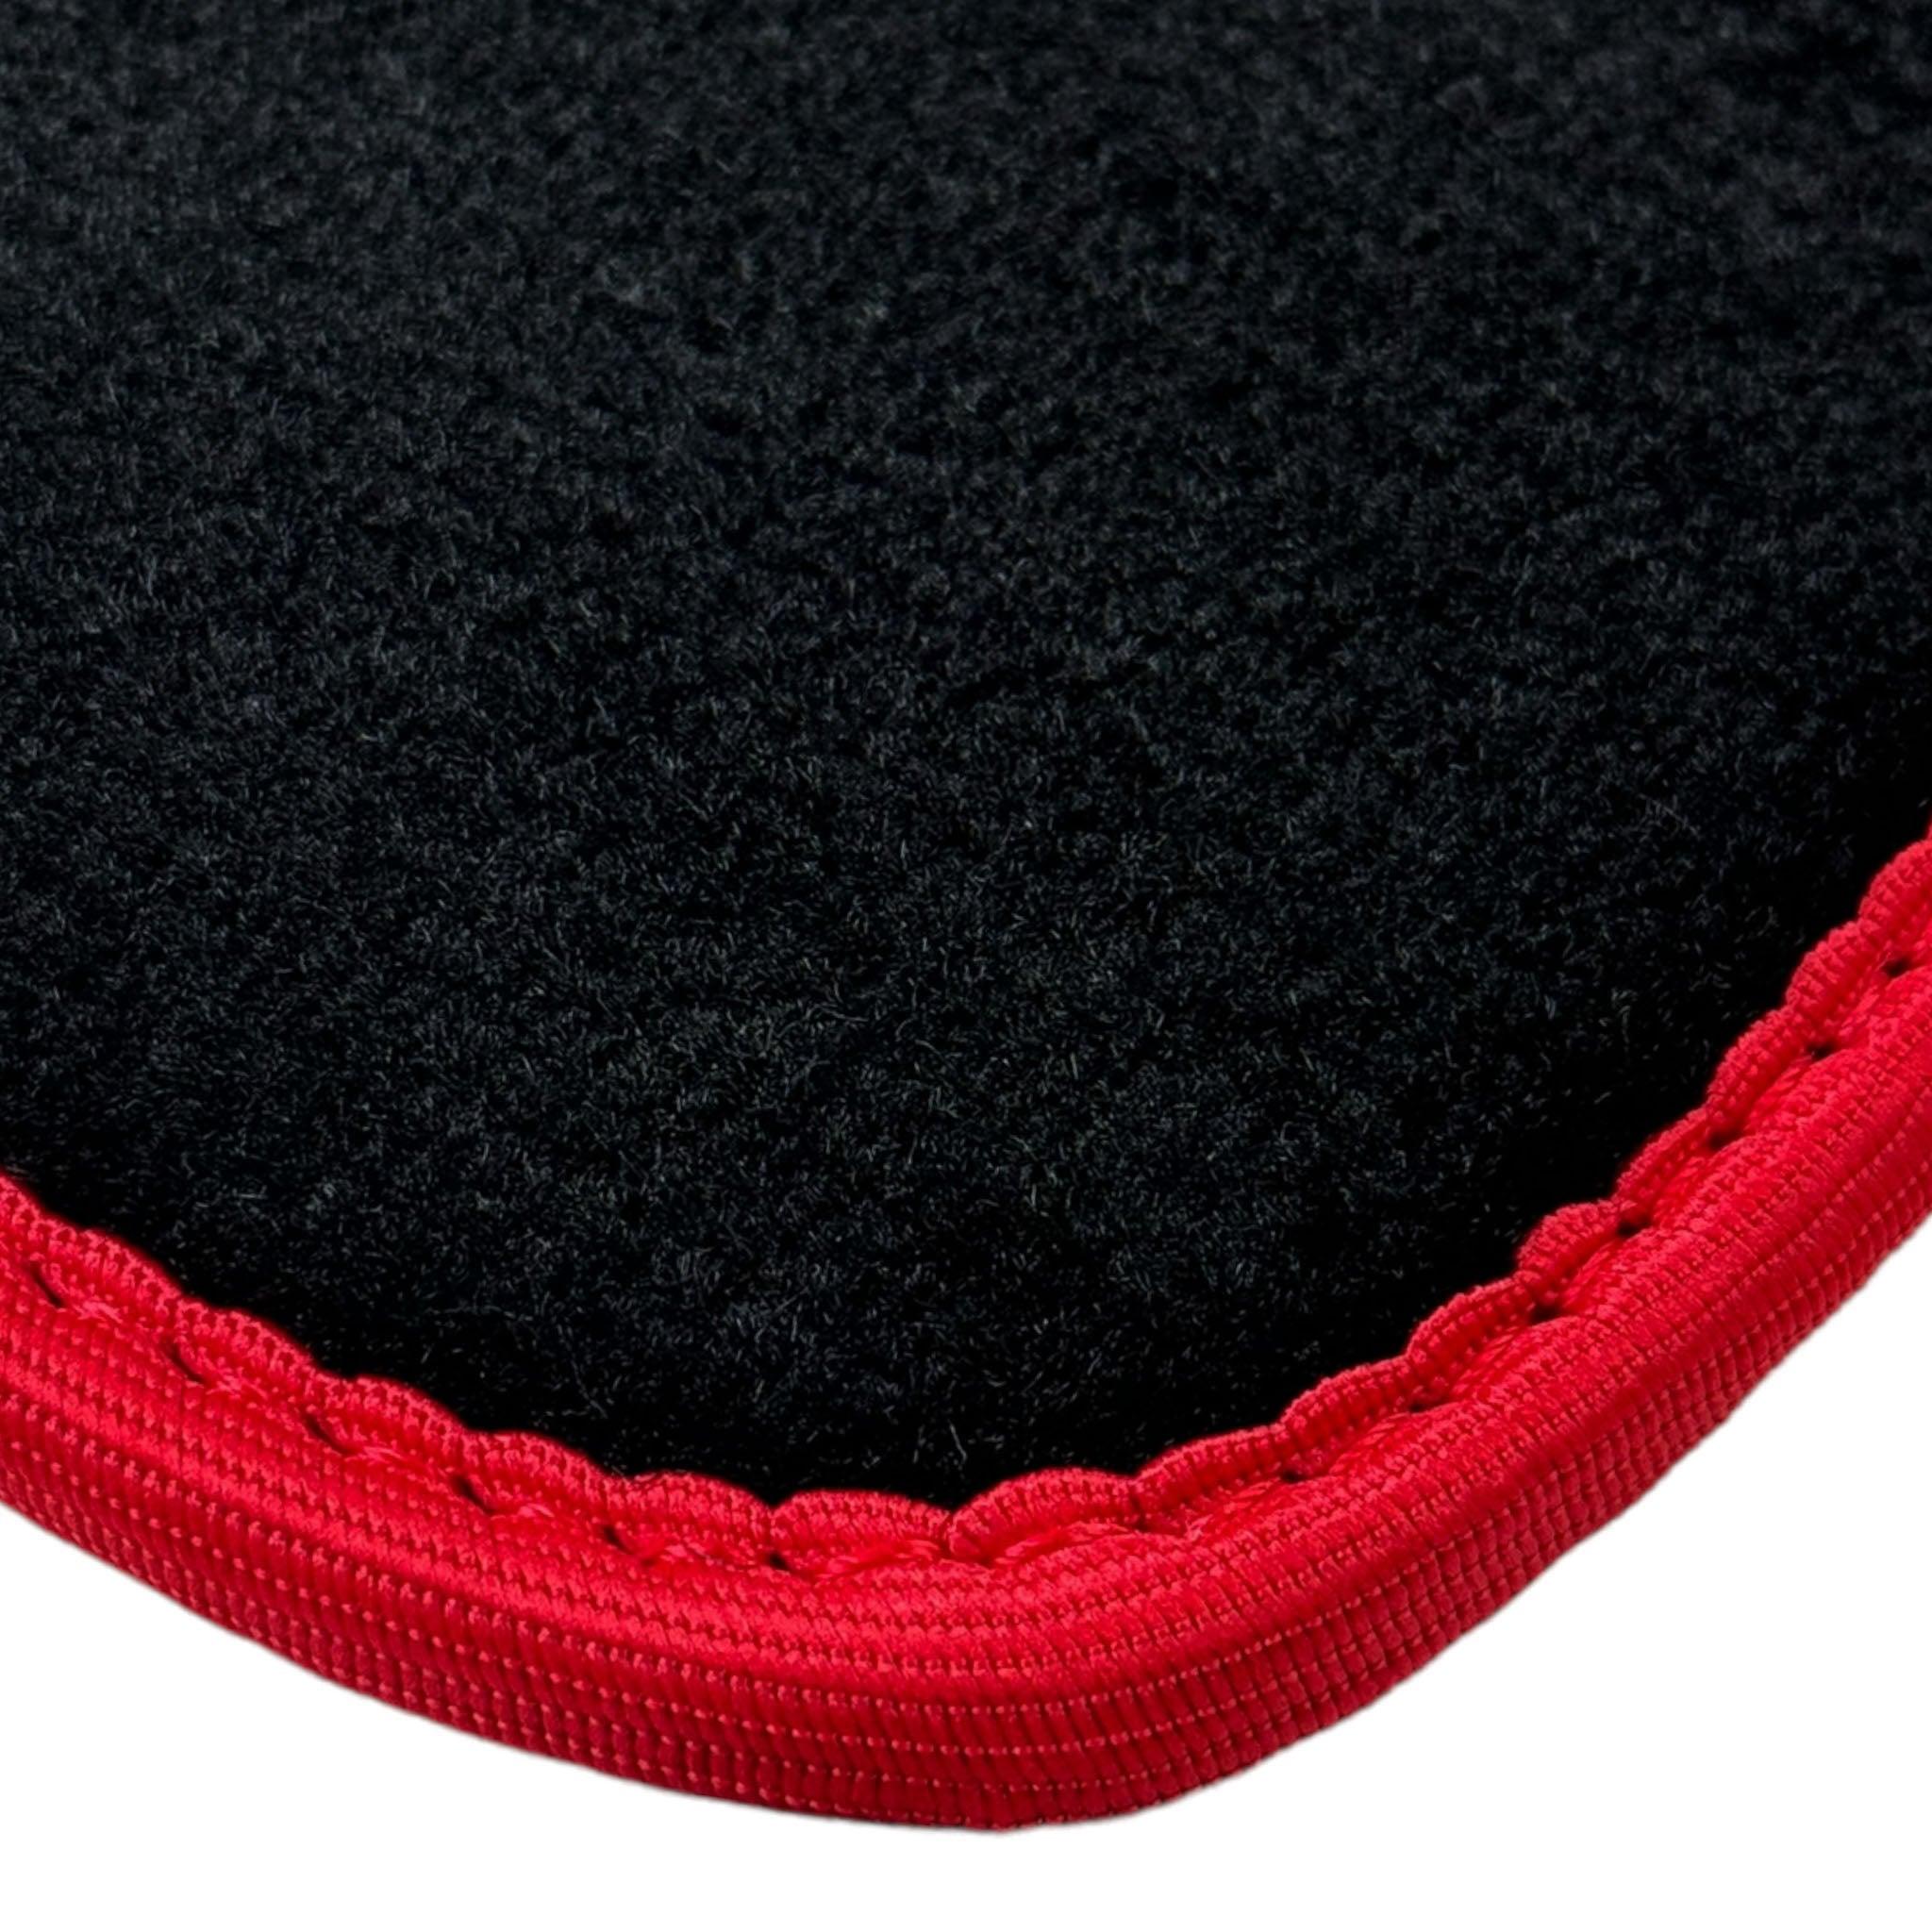 Black Floor Mats For BMW 6 Series E64 Convertible | Red Trim